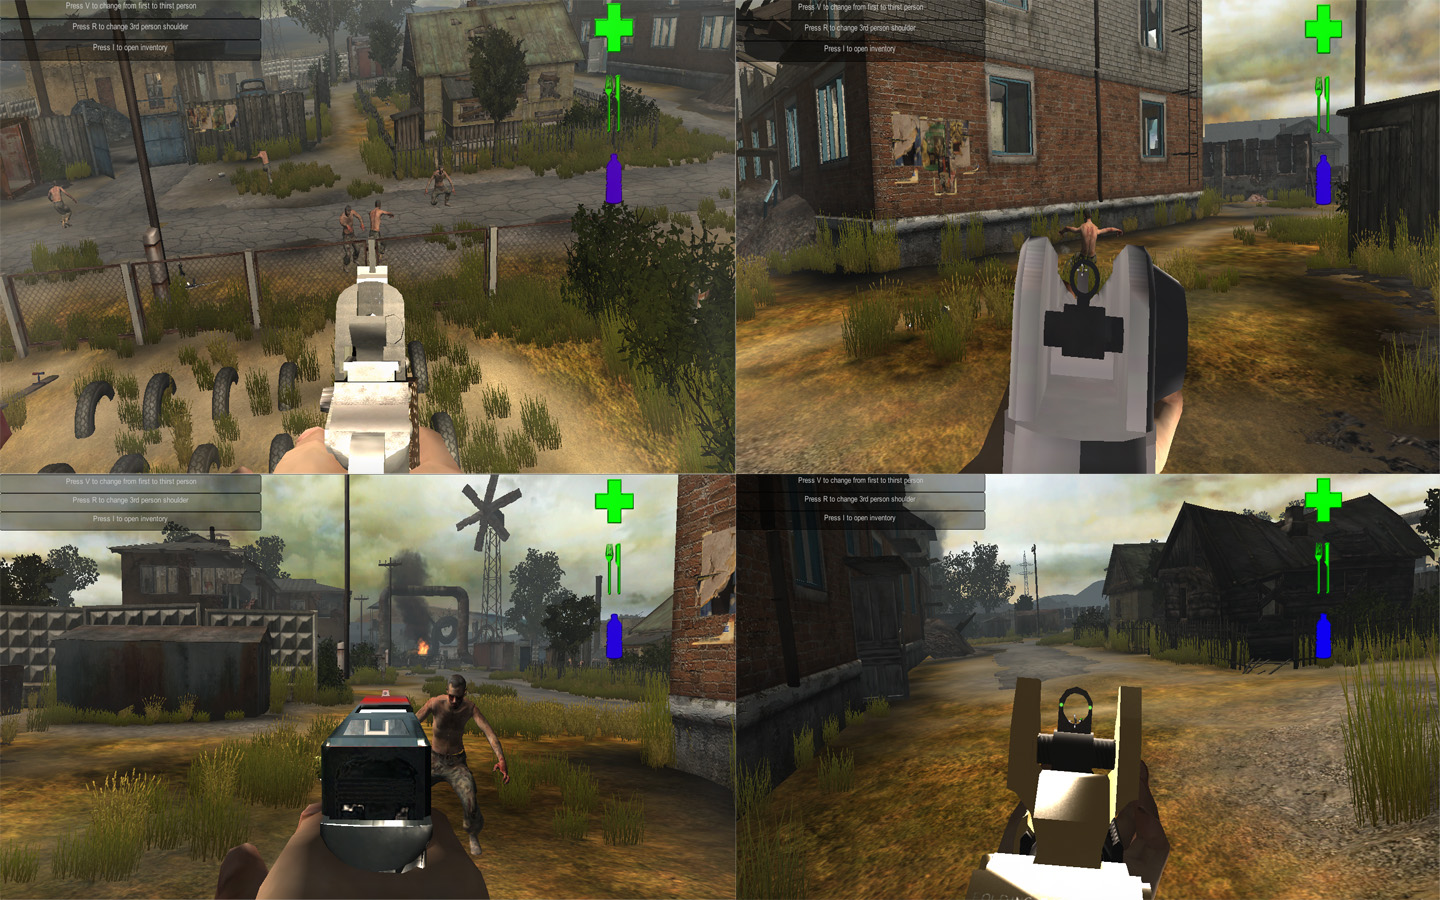 New Environment Assets And Aim Down Sights Image Not Dead